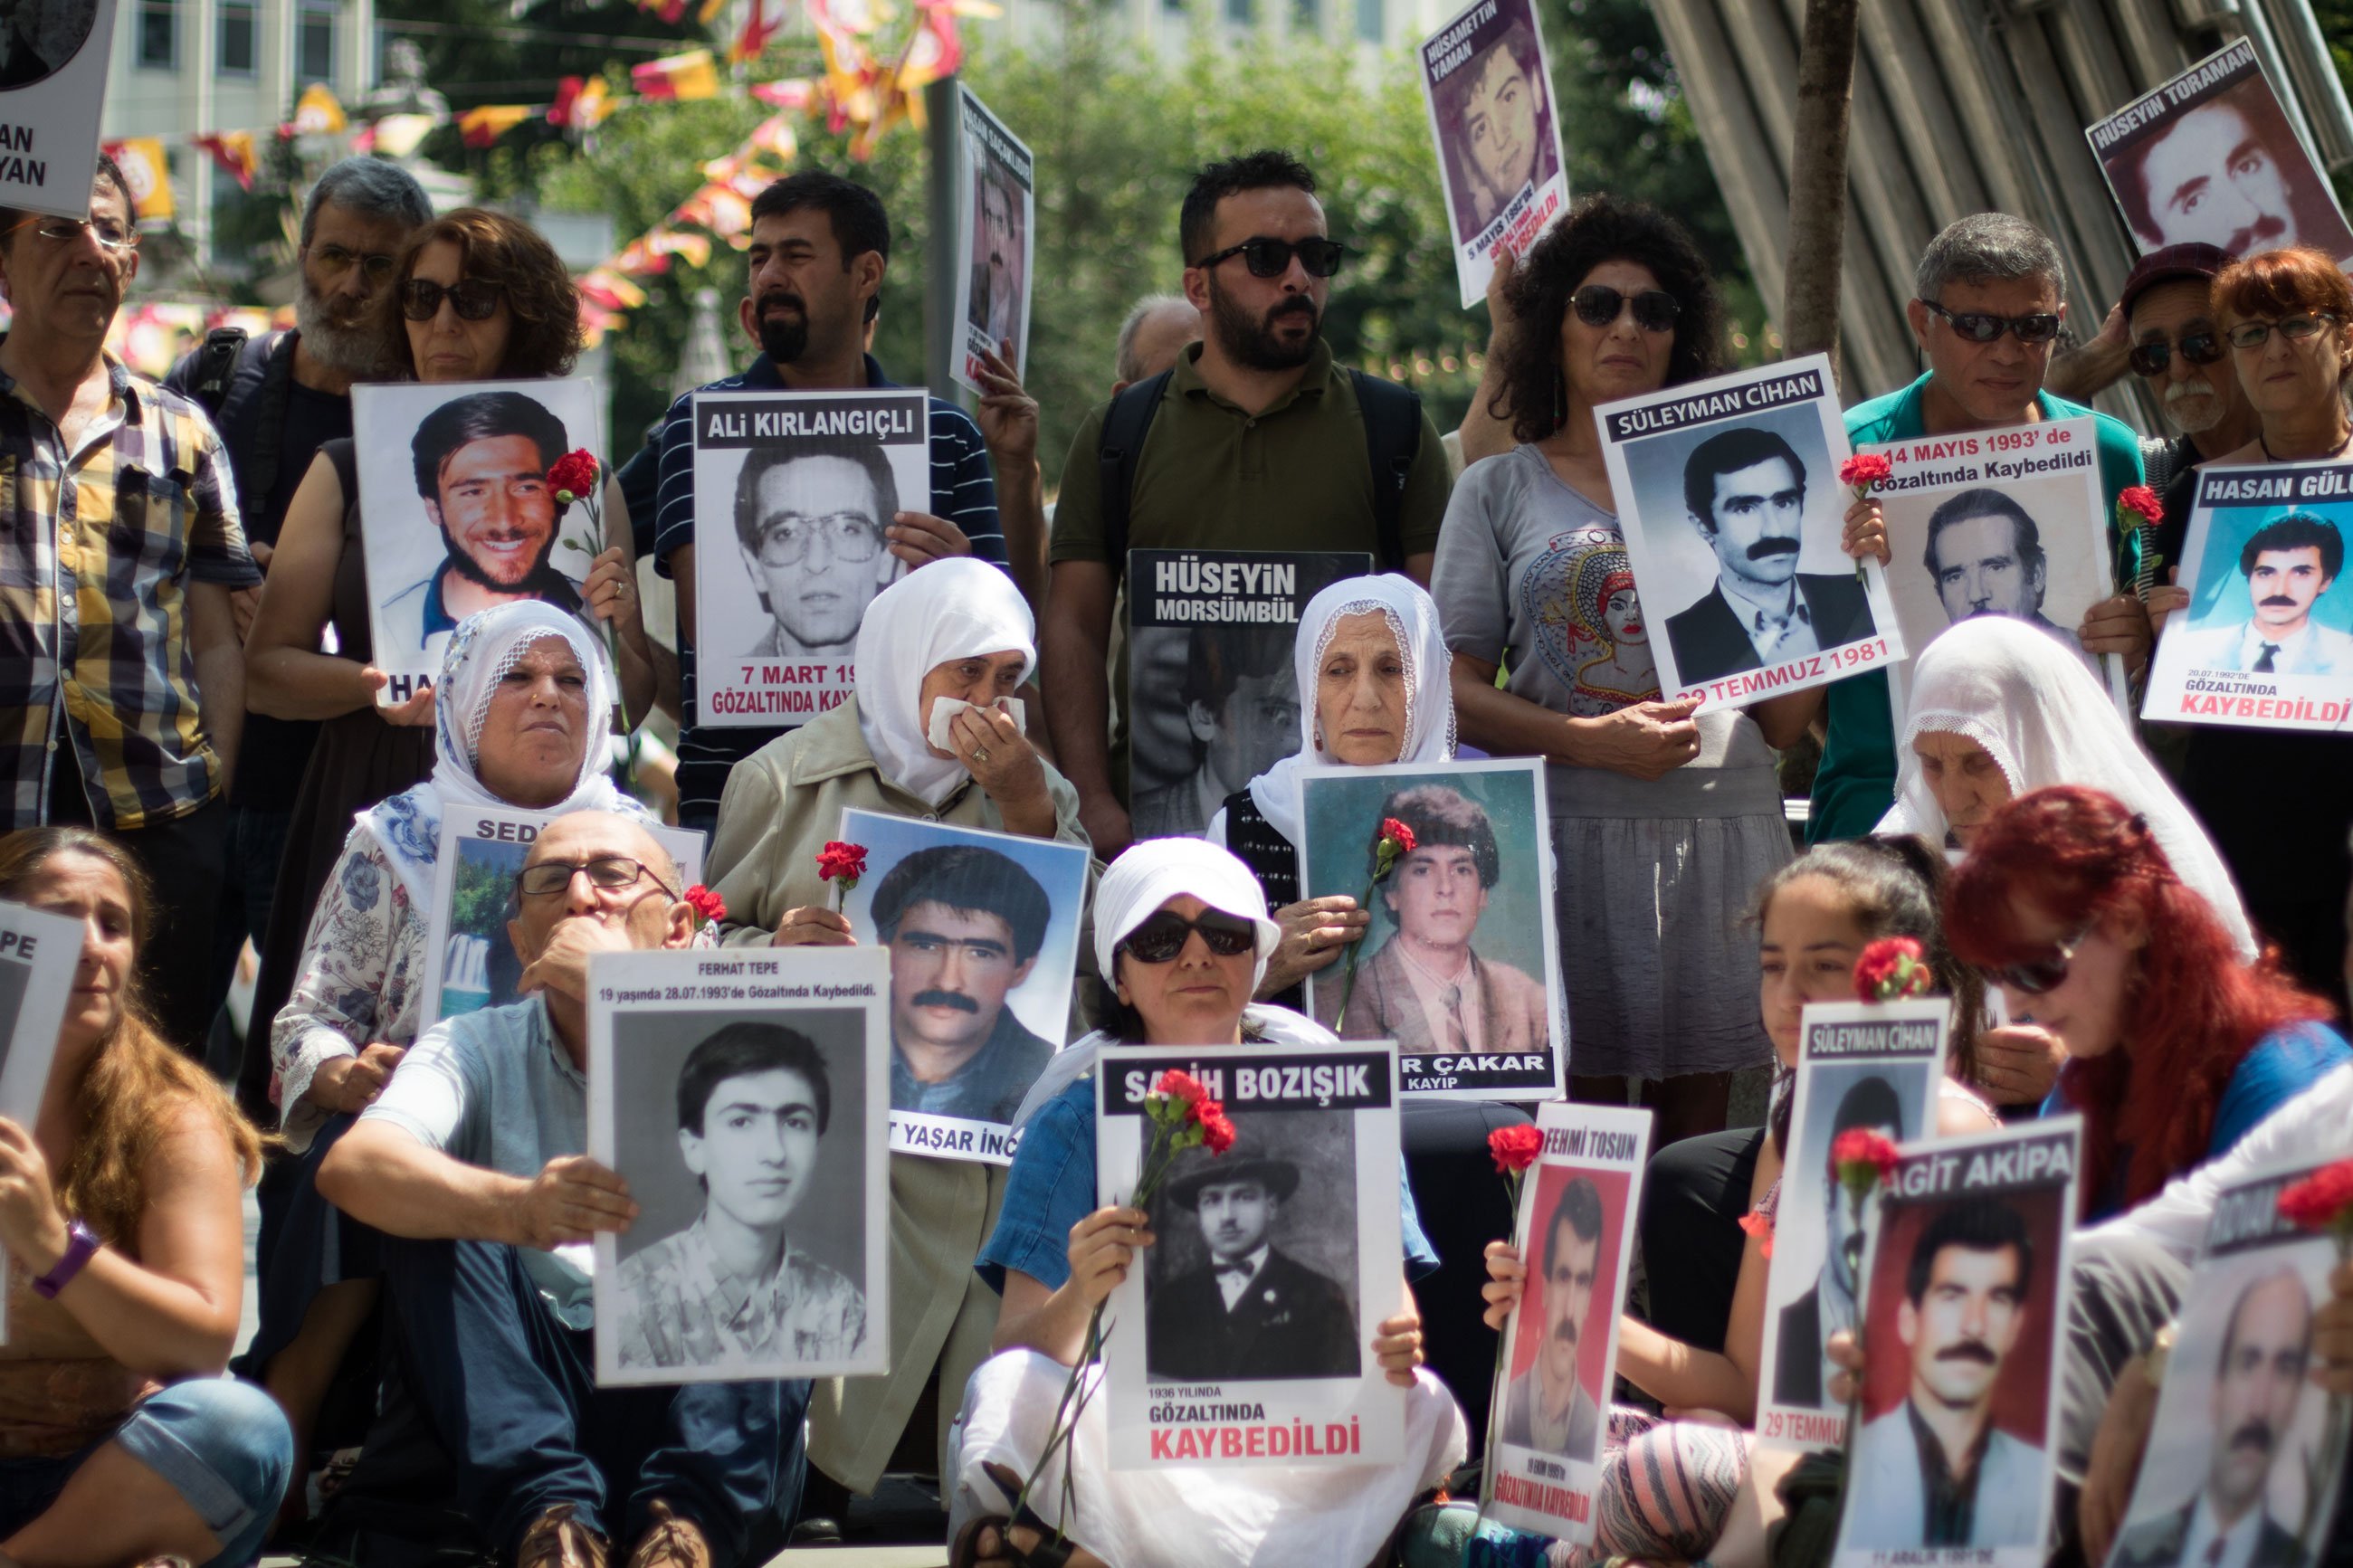 Photos of the disappeared among the crowd.